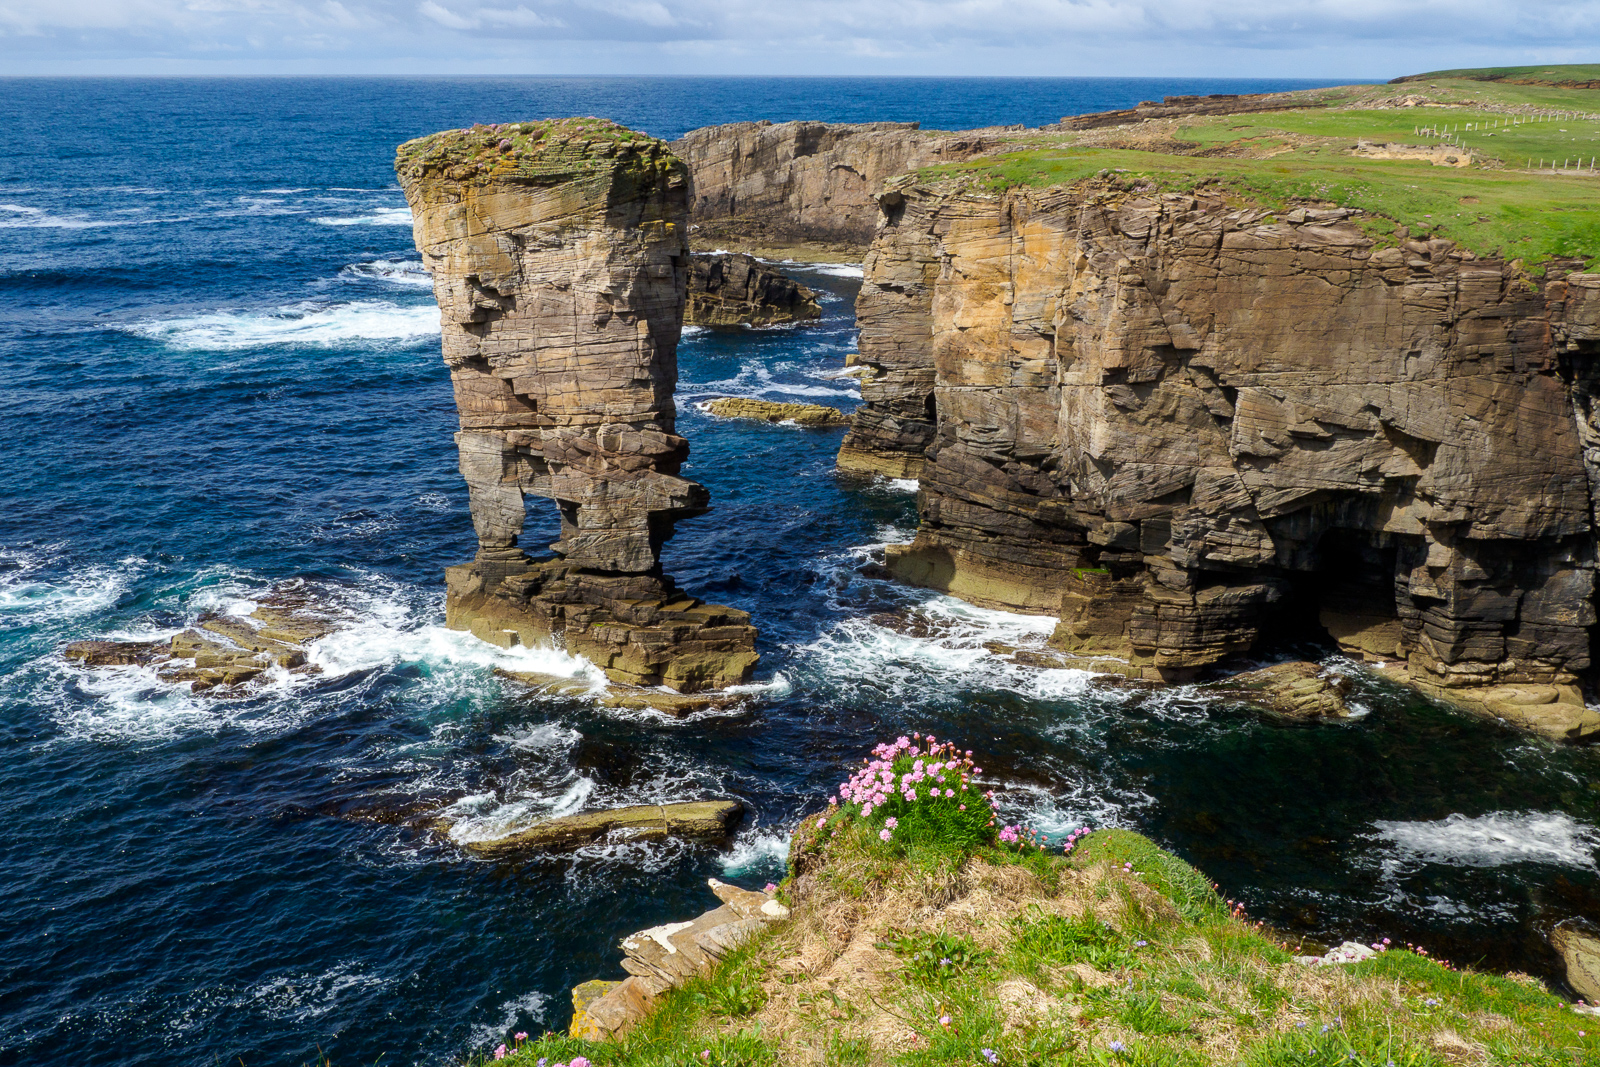 The Castle Sea Stack (Yesnaby Cliffs @ Mainland Orkney): See it on Eagle Eye's Scotland Small Ship Cruise! 